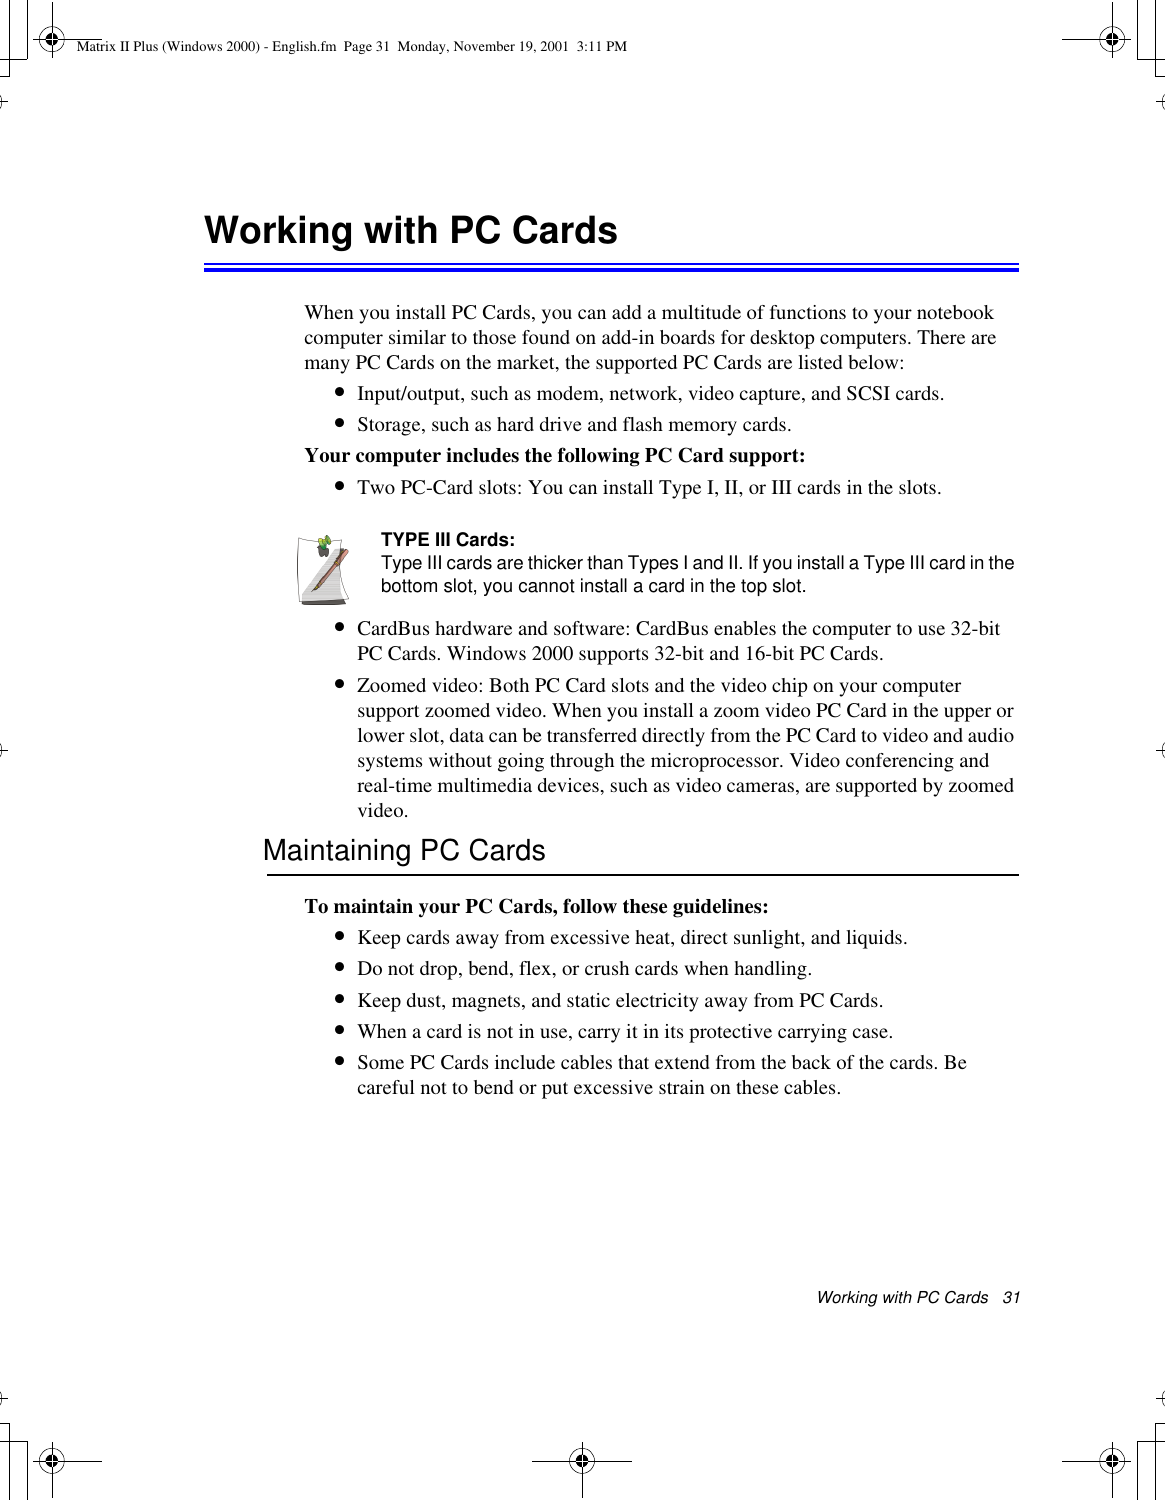 Working with PC Cards   31Working with PC Cards When you install PC Cards, you can add a multitude of functions to your notebook computer similar to those found on add-in boards for desktop computers. There are many PC Cards on the market, the supported PC Cards are listed below:•Input/output, such as modem, network, video capture, and SCSI cards.•Storage, such as hard drive and flash memory cards.Your computer includes the following PC Card support:•Two PC-Card slots: You can install Type I, II, or III cards in the slots. TYPE III Cards:Type III cards are thicker than Types I and II. If you install a Type III card in the bottom slot, you cannot install a card in the top slot.•CardBus hardware and software: CardBus enables the computer to use 32-bit PC Cards. Windows 2000 supports 32-bit and 16-bit PC Cards.•Zoomed video: Both PC Card slots and the video chip on your computer support zoomed video. When you install a zoom video PC Card in the upper or lower slot, data can be transferred directly from the PC Card to video and audio systems without going through the microprocessor. Video conferencing and real-time multimedia devices, such as video cameras, are supported by zoomed video.Maintaining PC CardsTo maintain your PC Cards, follow these guidelines:•Keep cards away from excessive heat, direct sunlight, and liquids.•Do not drop, bend, flex, or crush cards when handling.•Keep dust, magnets, and static electricity away from PC Cards.•When a card is not in use, carry it in its protective carrying case.•Some PC Cards include cables that extend from the back of the cards. Be careful not to bend or put excessive strain on these cables.Matrix II Plus (Windows 2000) - English.fm  Page 31  Monday, November 19, 2001  3:11 PM